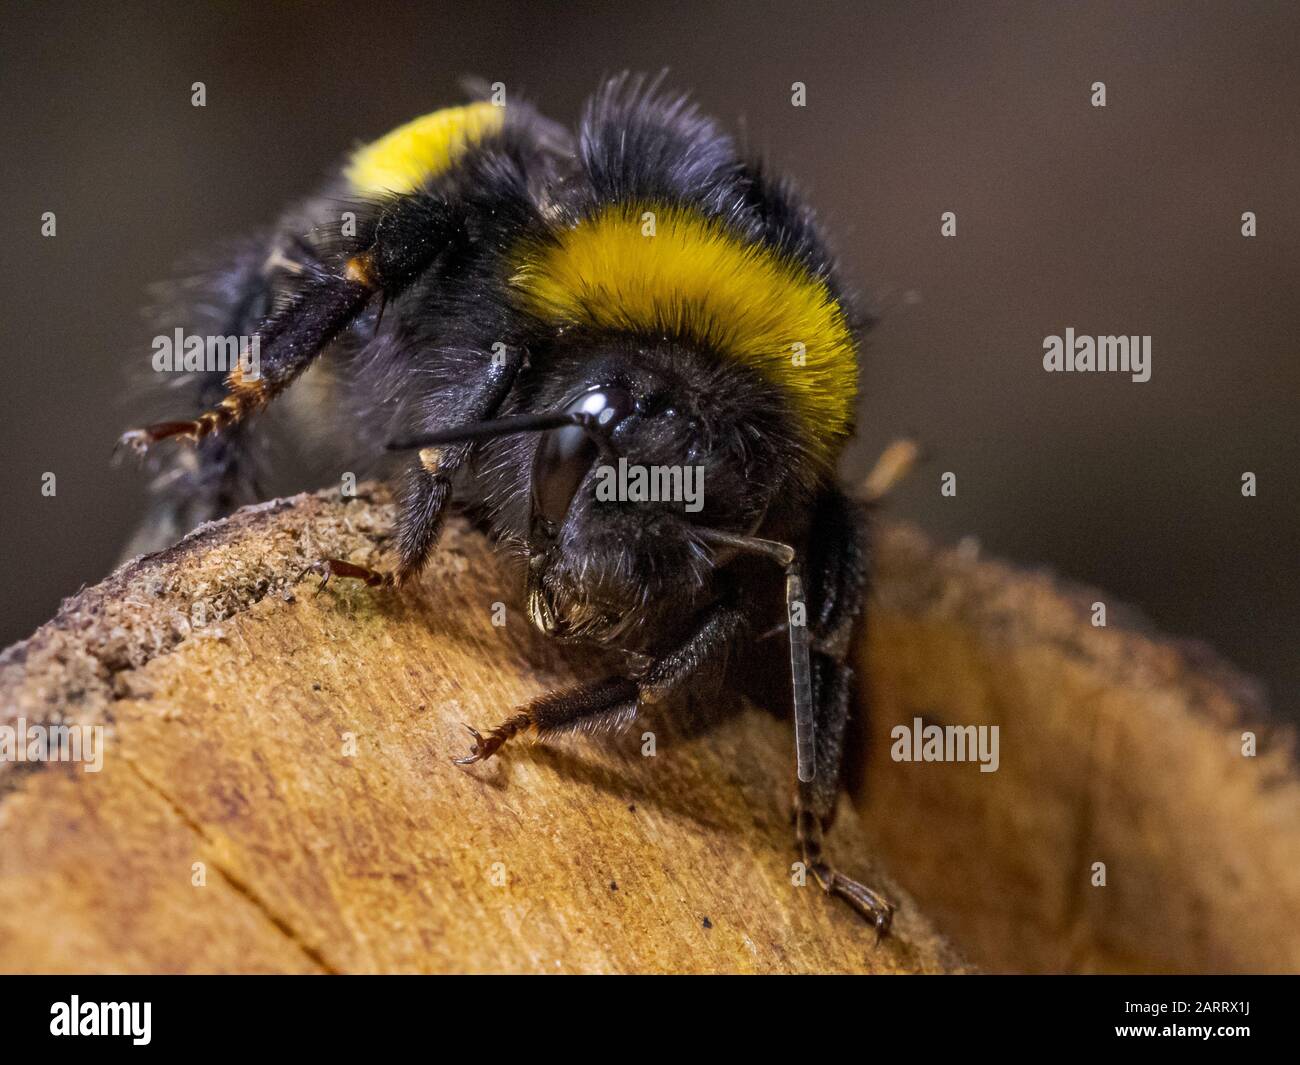 Close Up image of a Bumblebee on a log in Sydenham Hill Wood in South London Foto Stock